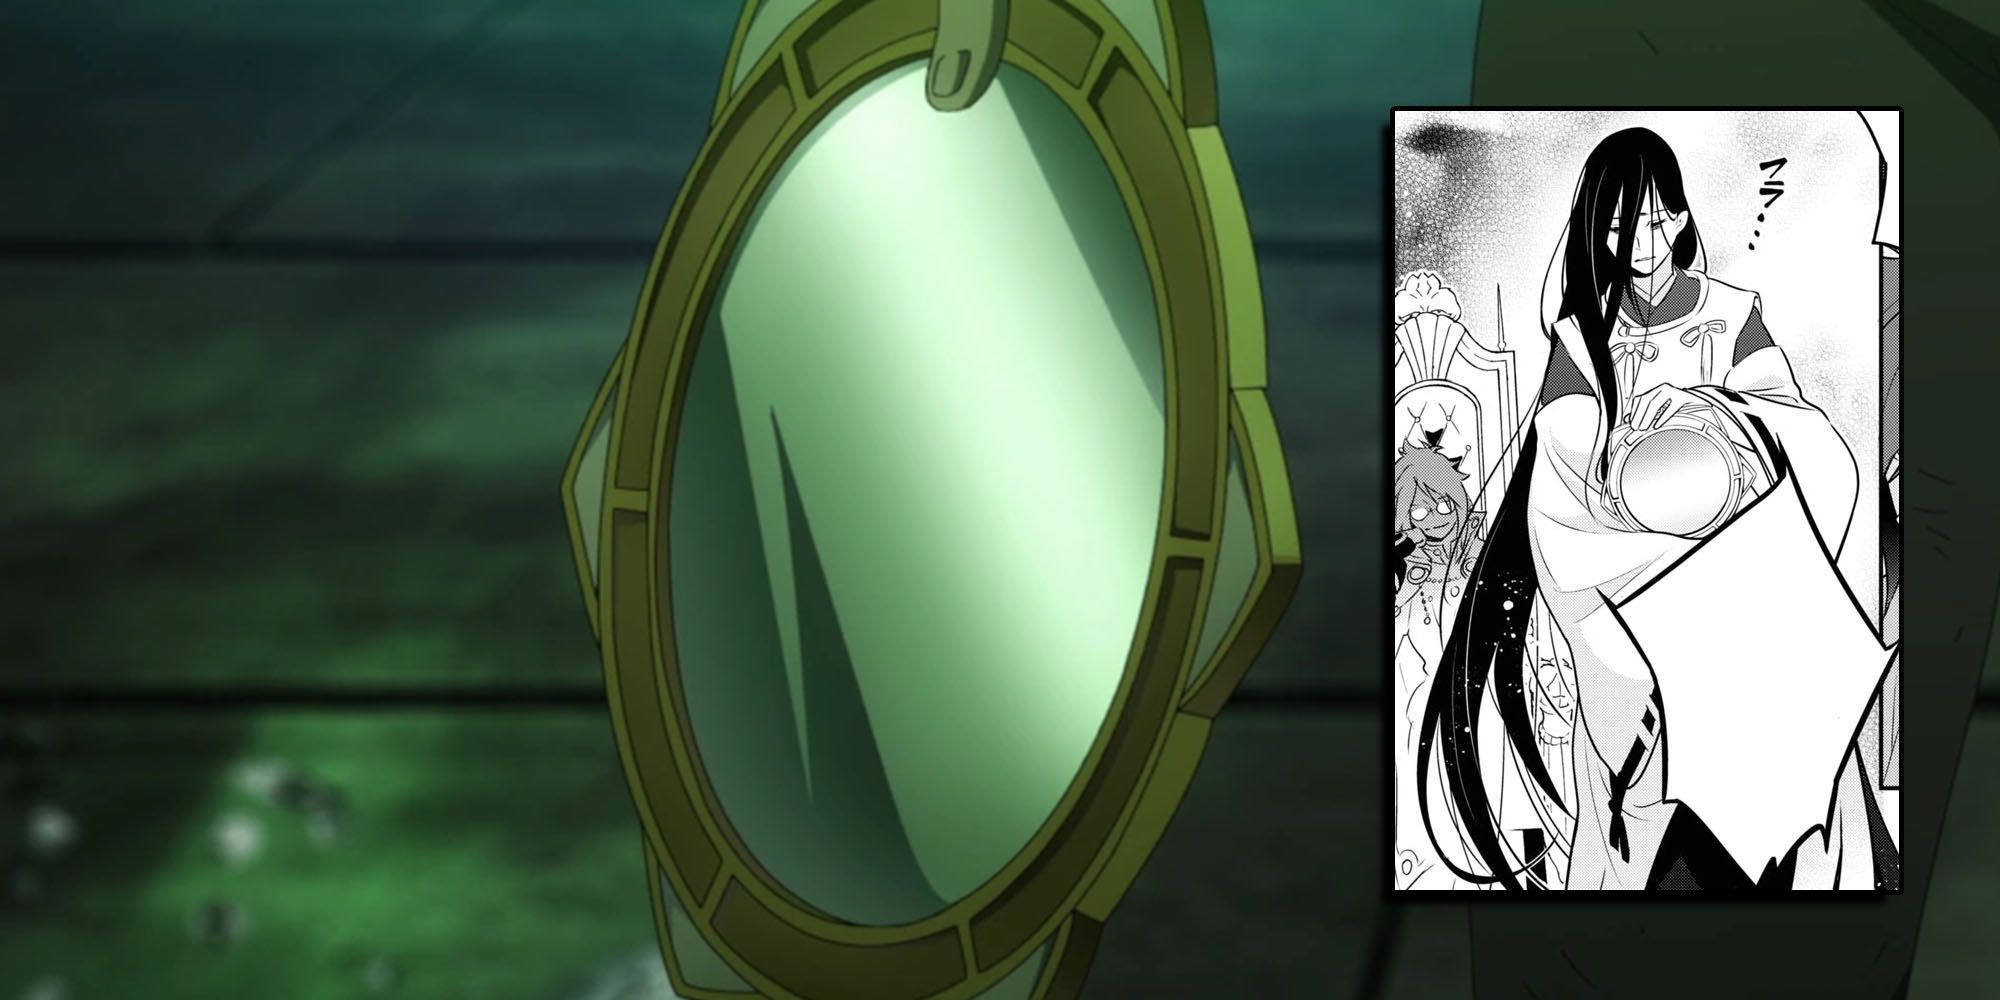 The Rising Of The Shield Hero - The Vassal Mirror Weapon Seen In The Anime With A Panel Of Albert Overlaid On Top